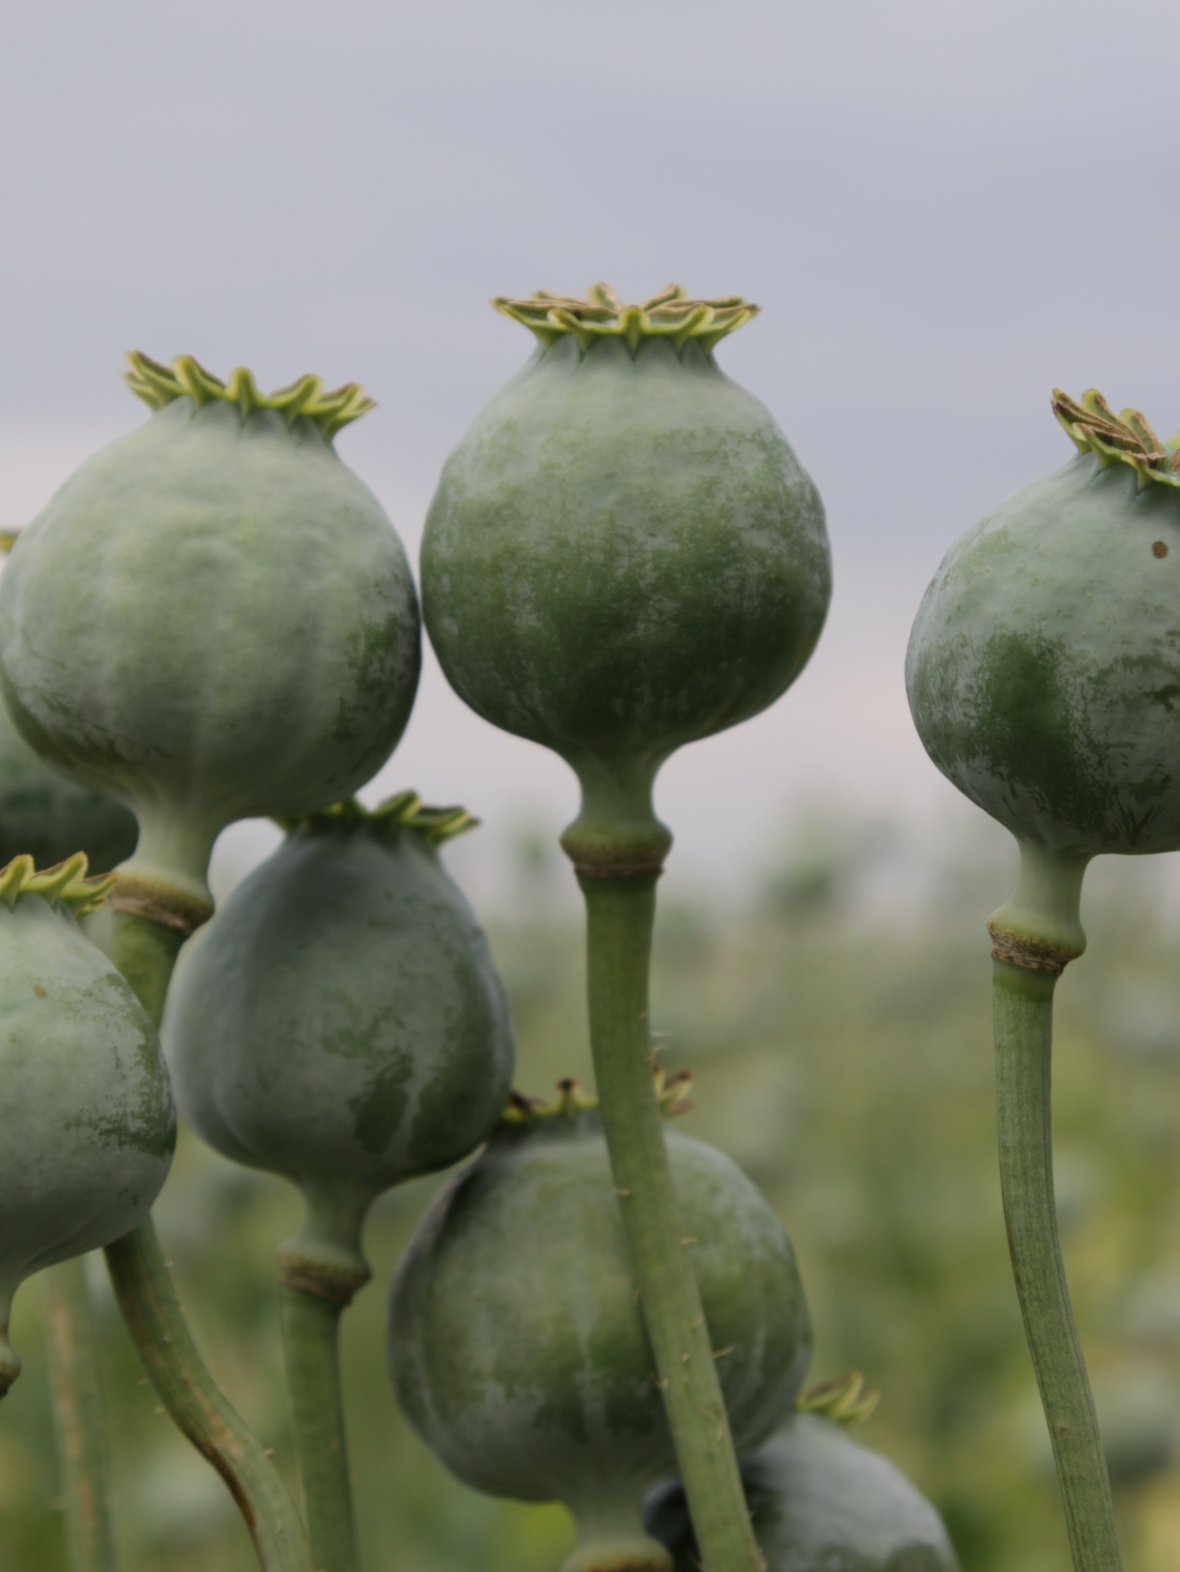 Tell the FDA to Keep Poppy Seeds Free of Dangerous Opiate Contamination